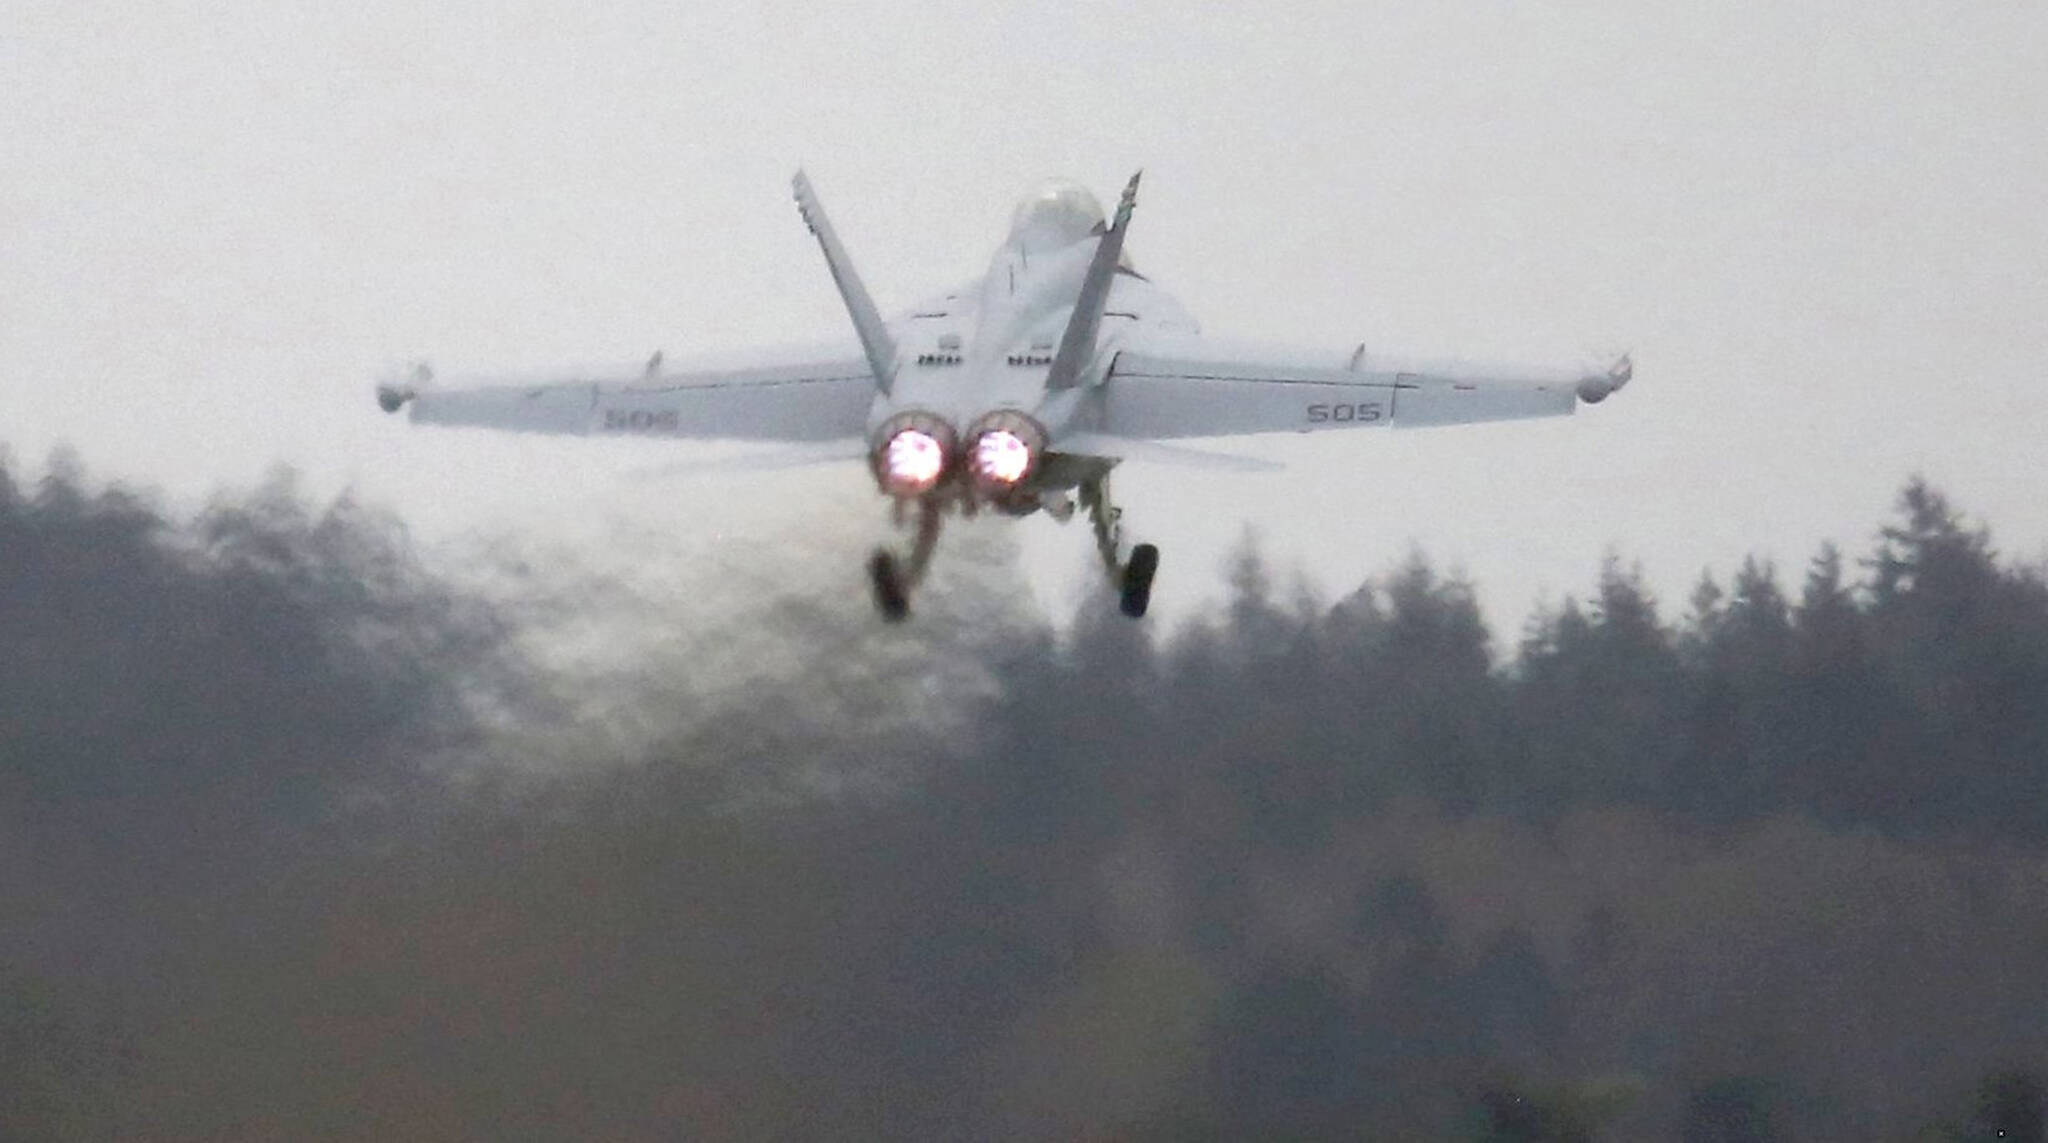 Ken Lambert | Seattle Times, file photo 
An EA-18G Growler takes off from Naval Air Station Whidbey Island during an exercise on March 10, 2016.